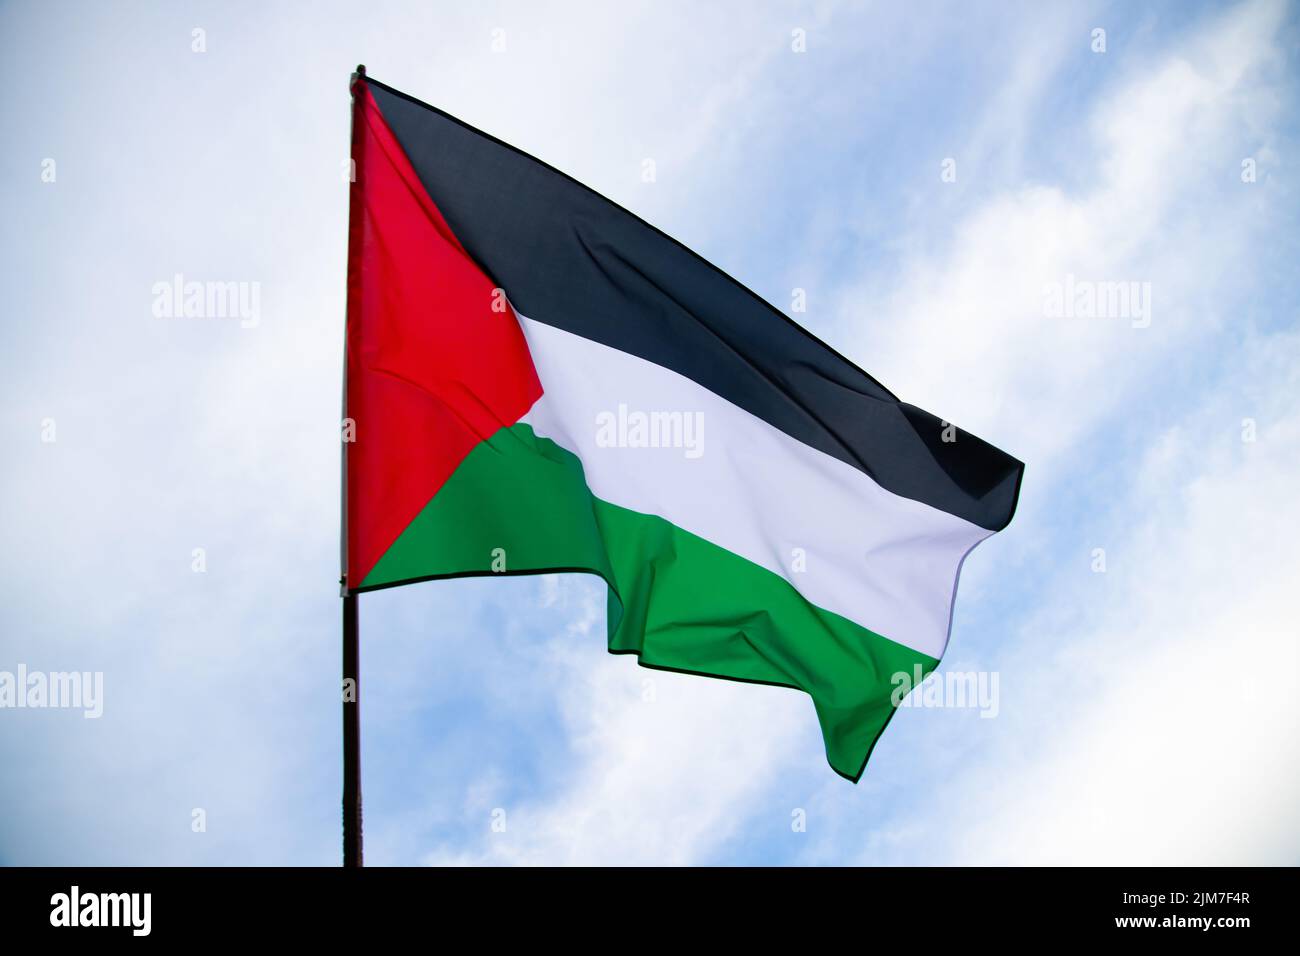 Palestine national flag waving in the wind. International relations concept. Stock Photo